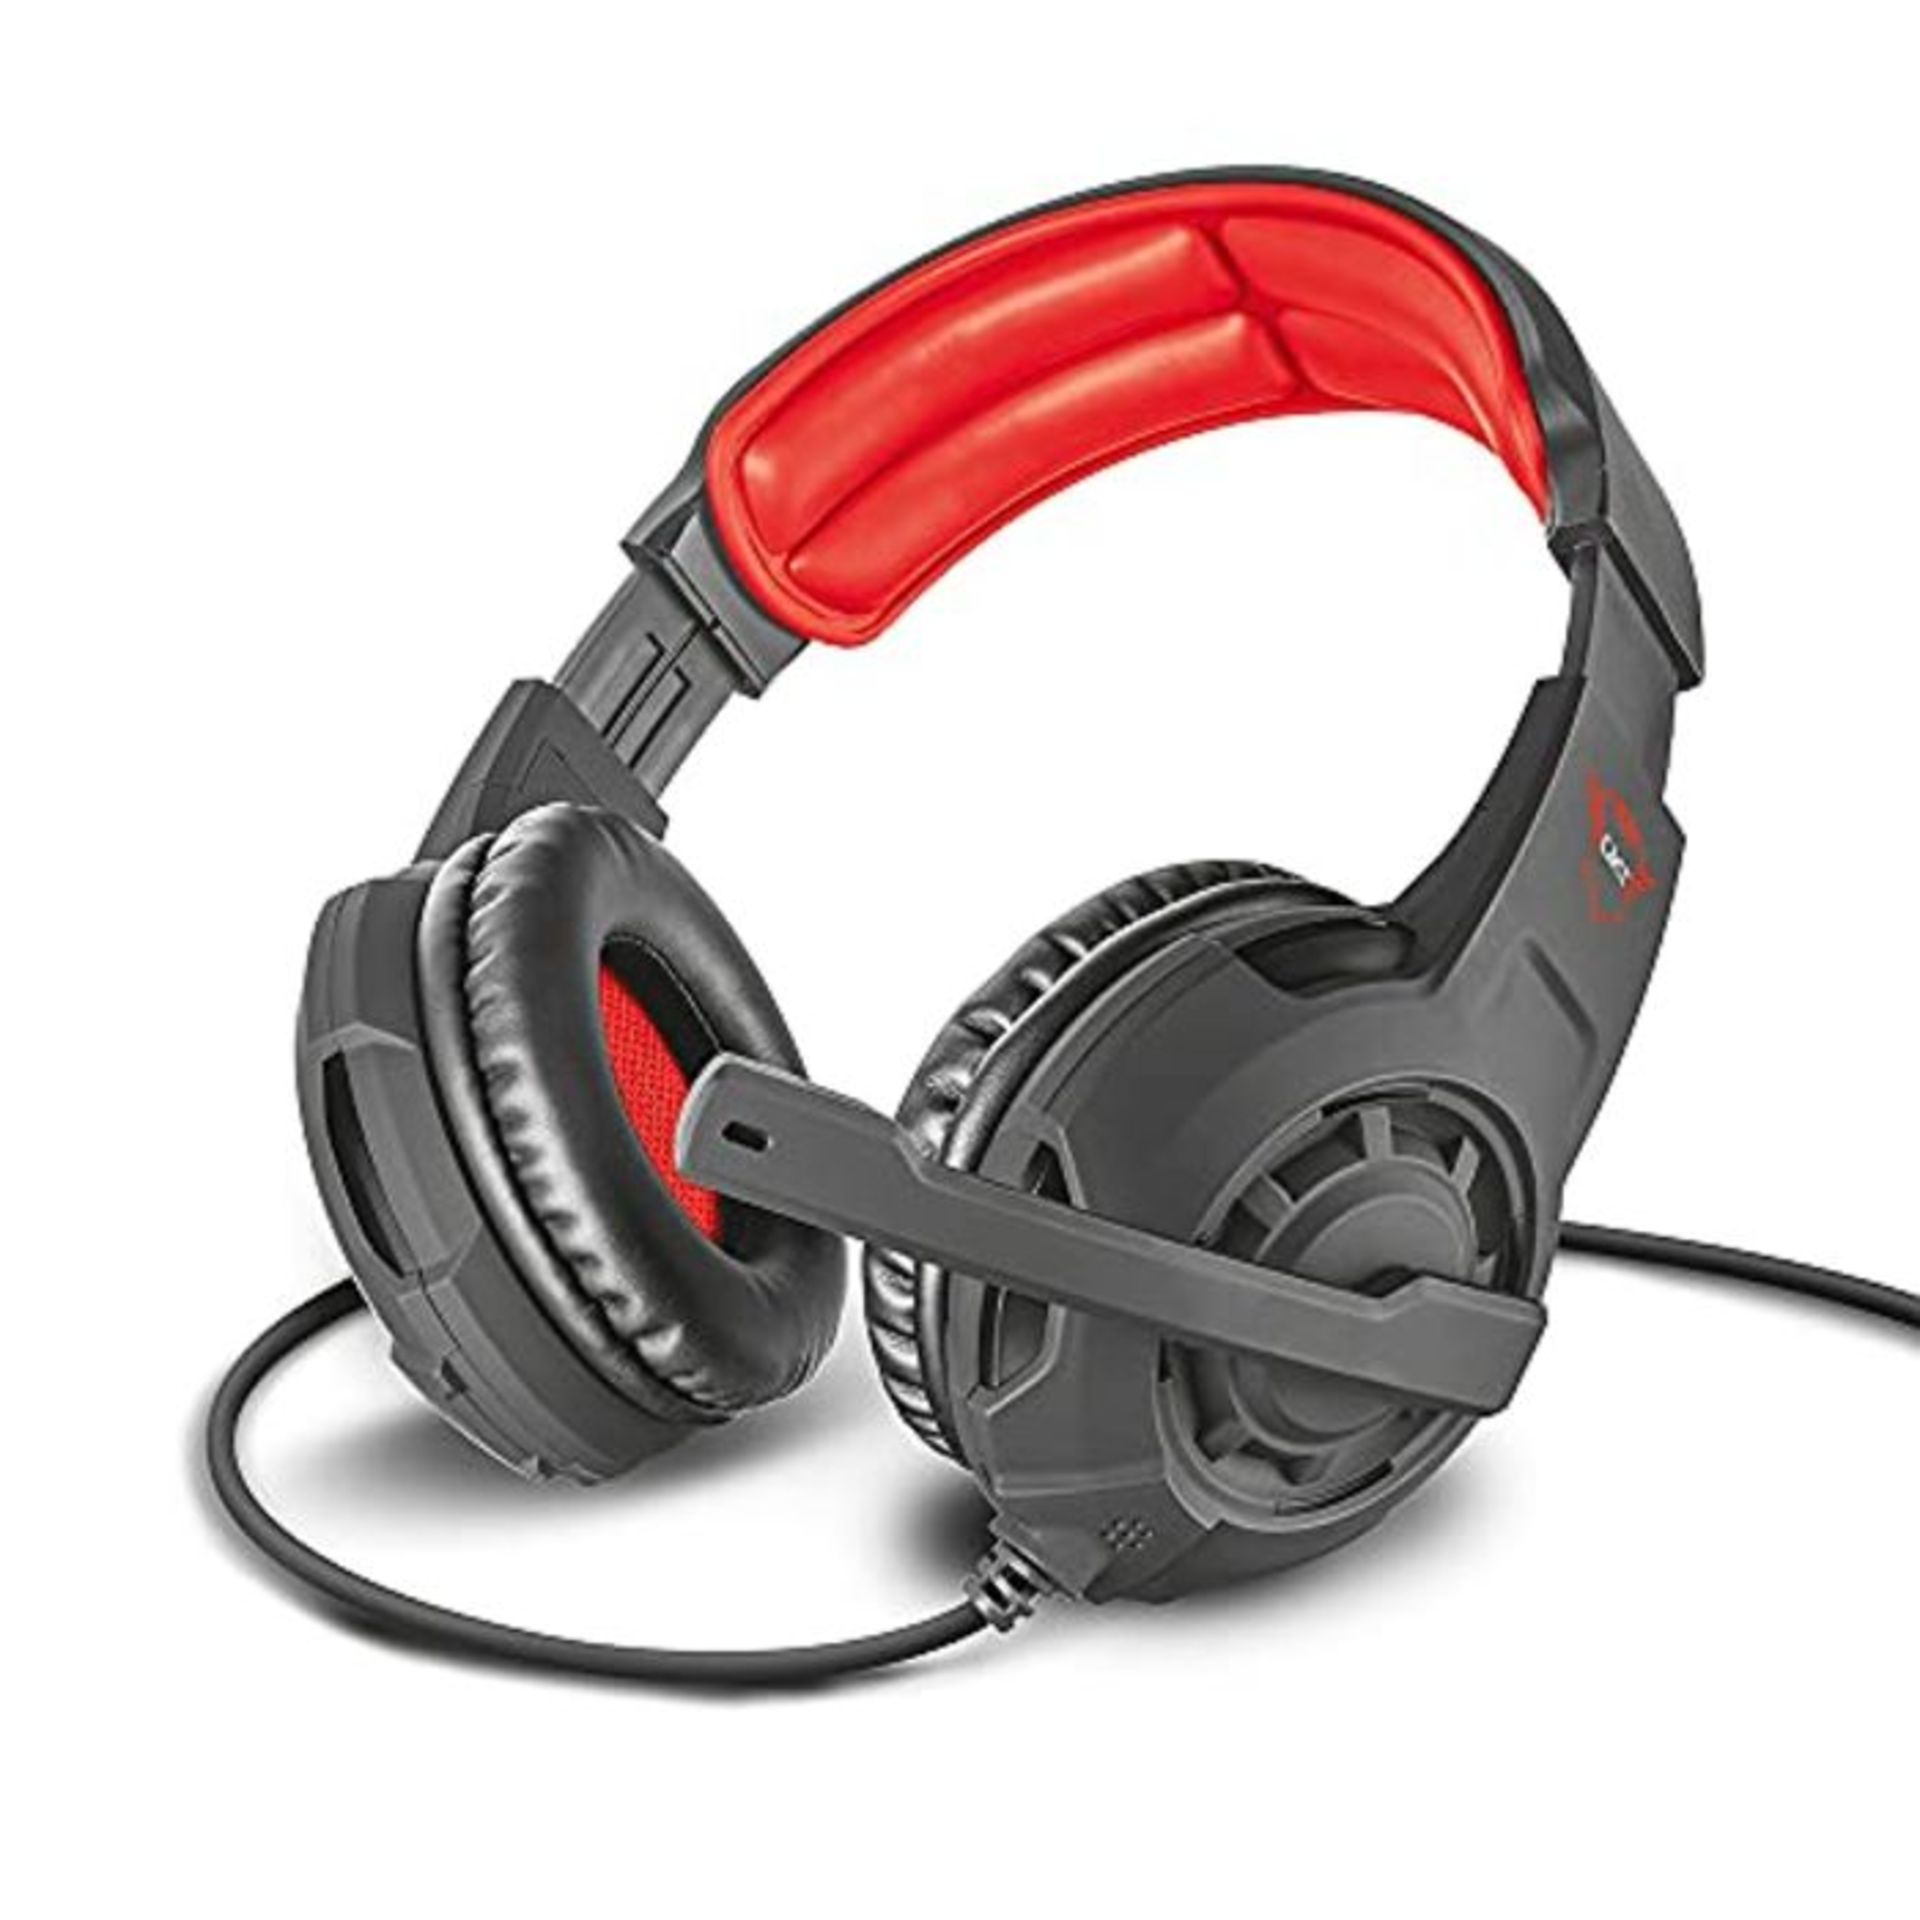 Trust Gaming Headset GXT 310 Radius with Microphone, Adjustable Mic and Headband, Wire